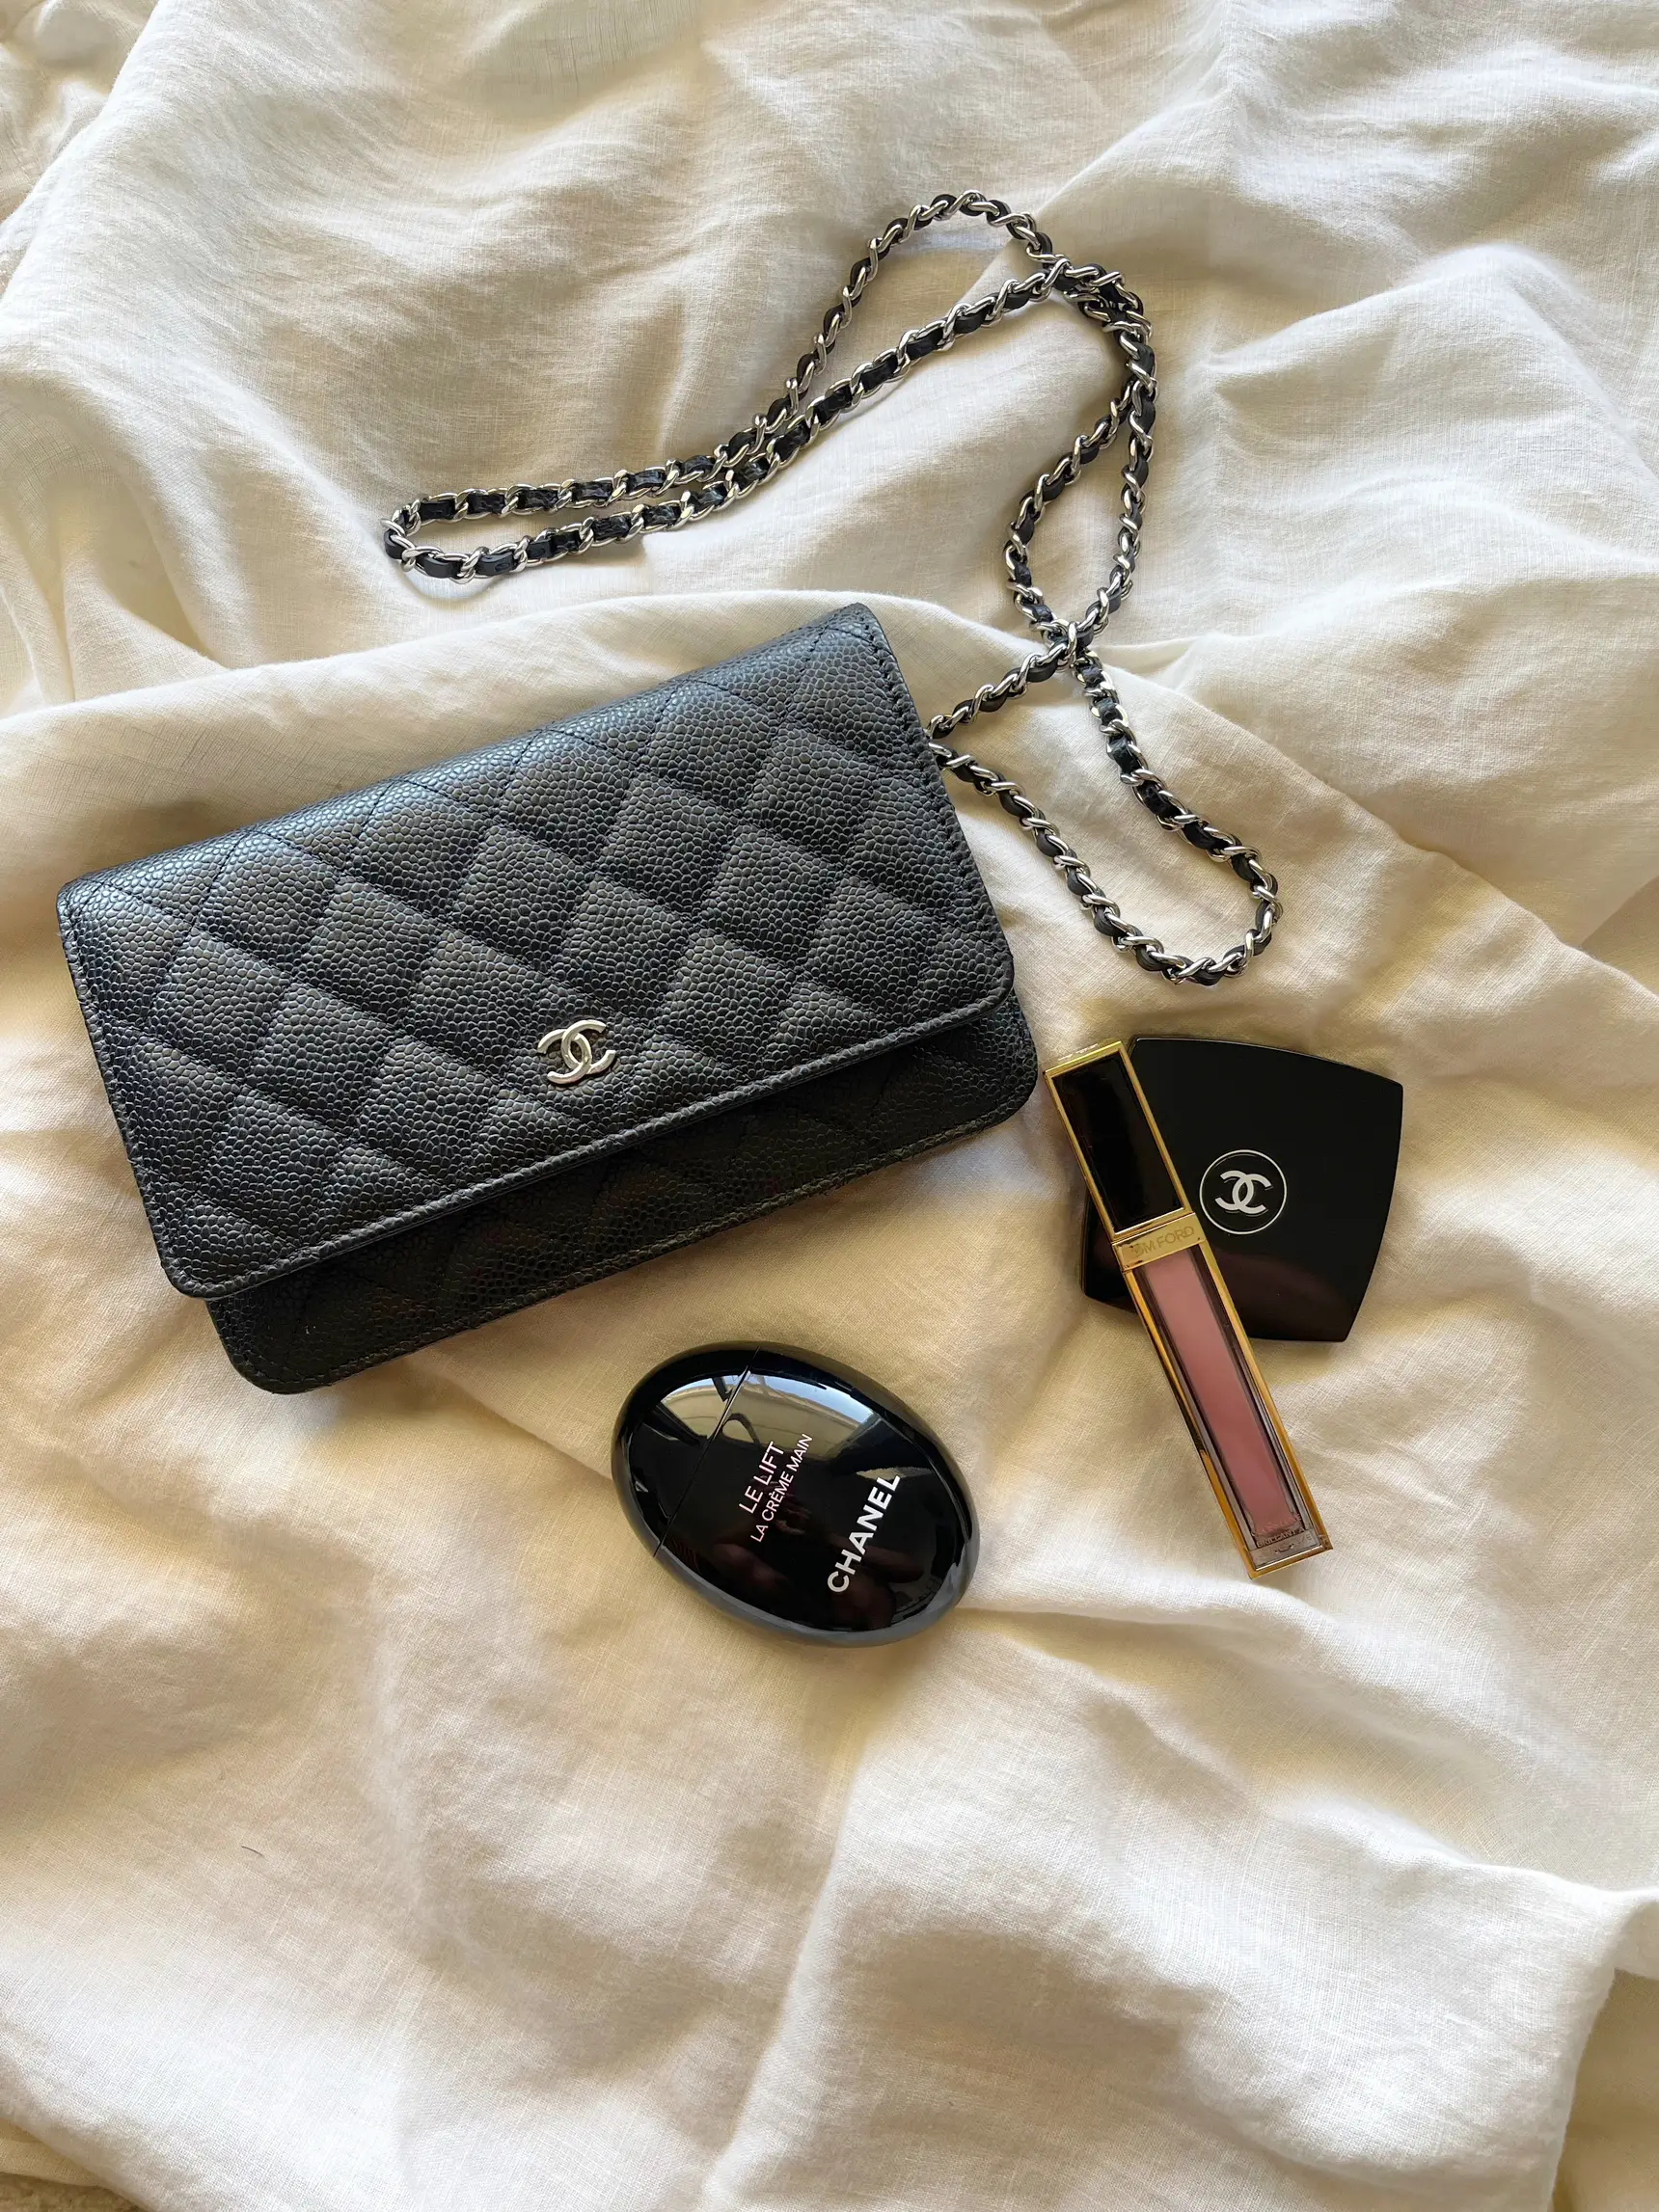 Chanel WOC review - ✨, Gallery posted by angiely